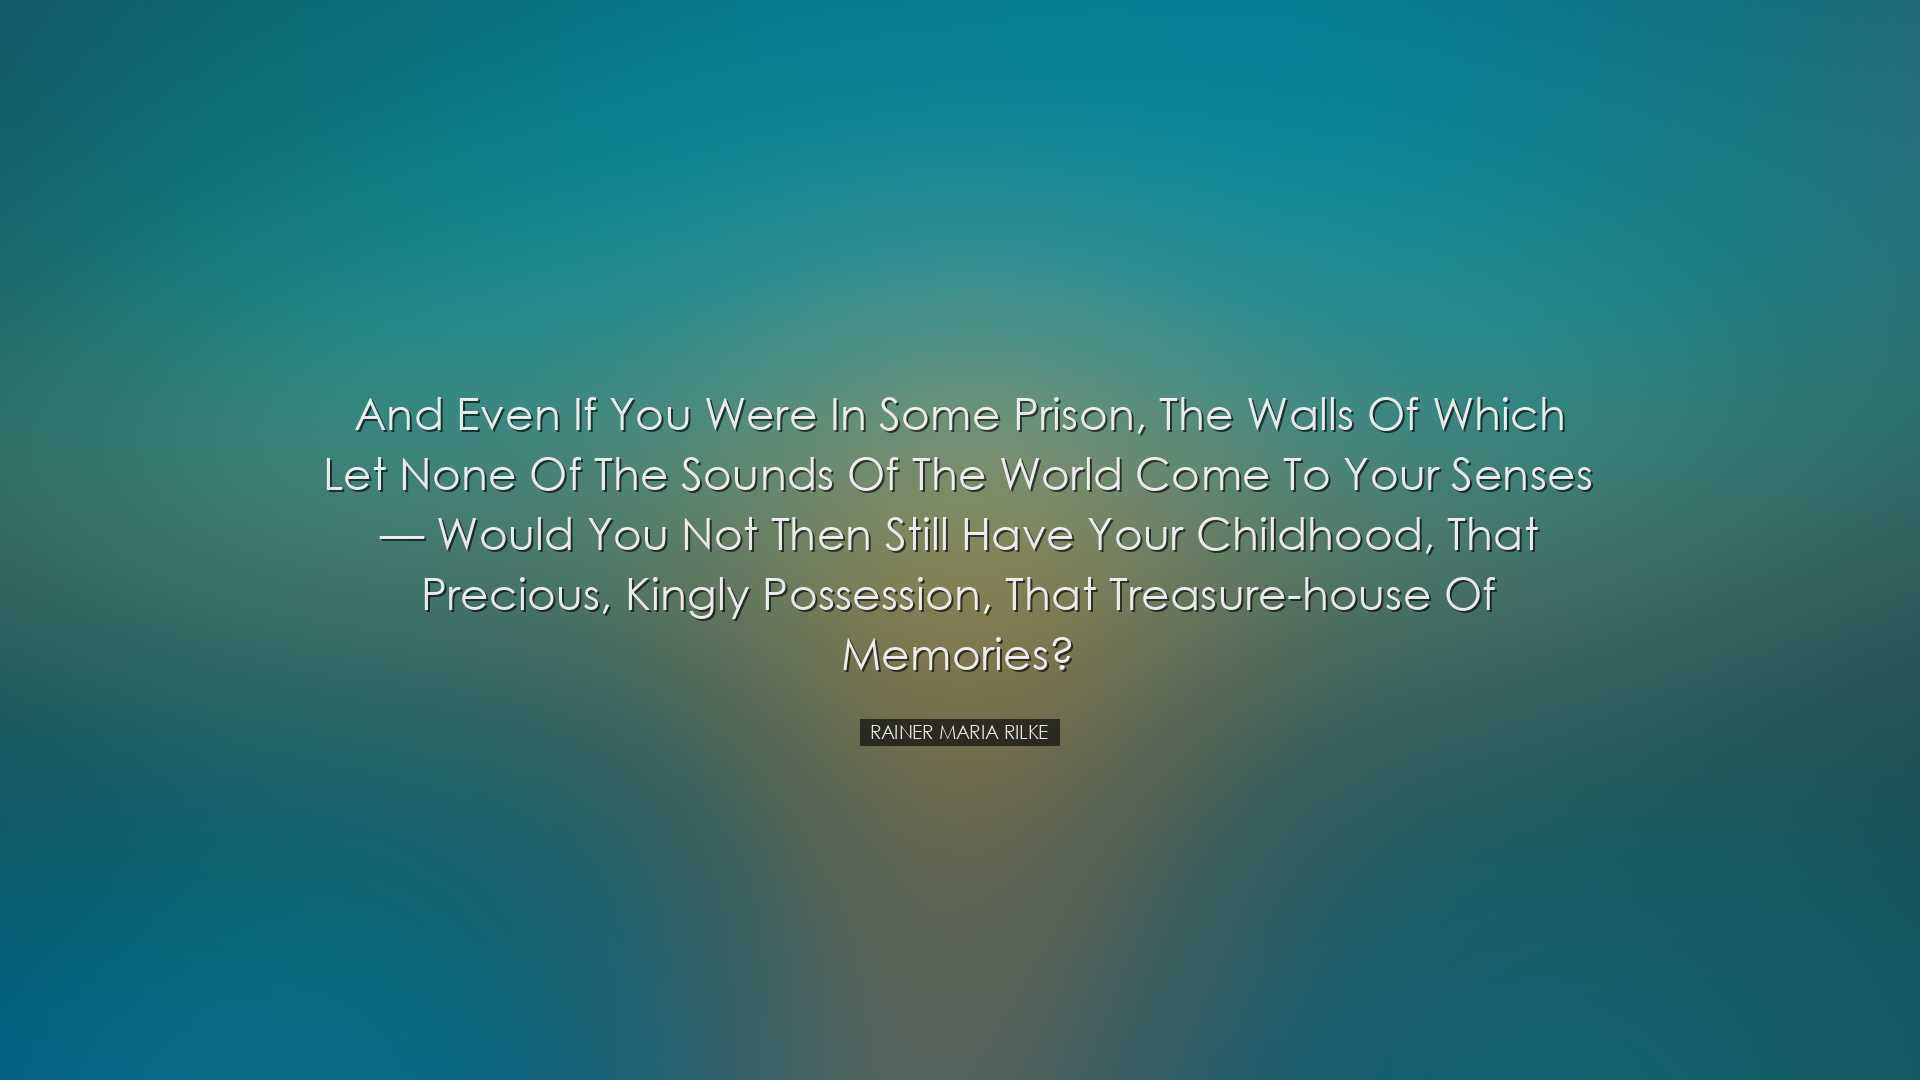 And even if you were in some prison, the walls of which let none o